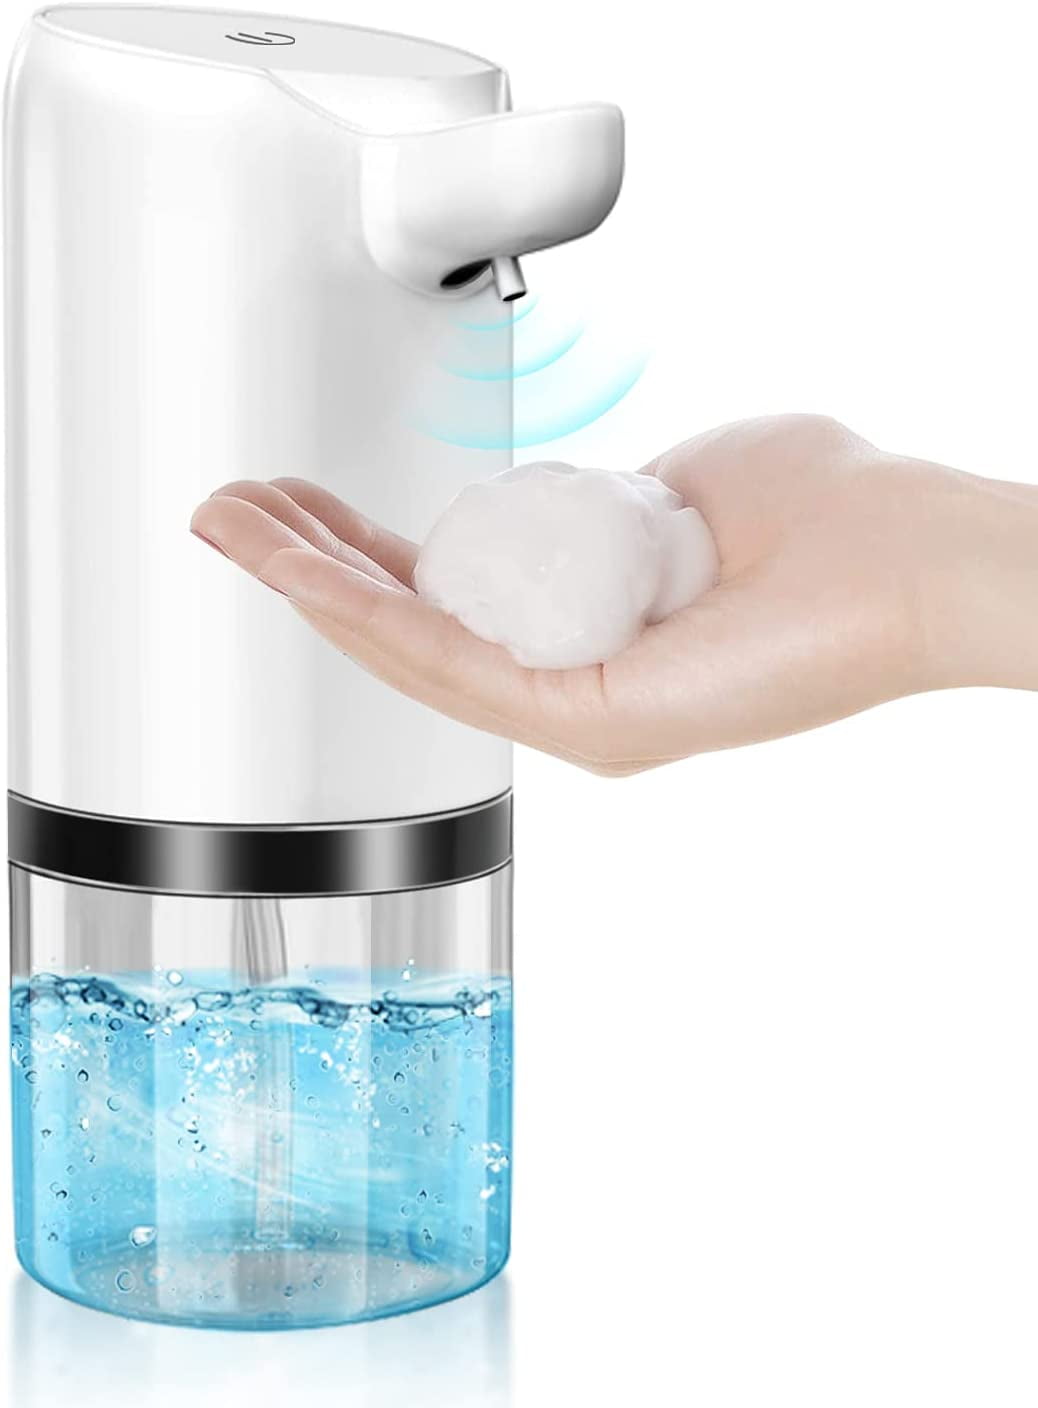 1 Automatic Hand Soap Dispenser 1 Unit 2 Foaming Soap Refill Tablets Details about   Soapsy 